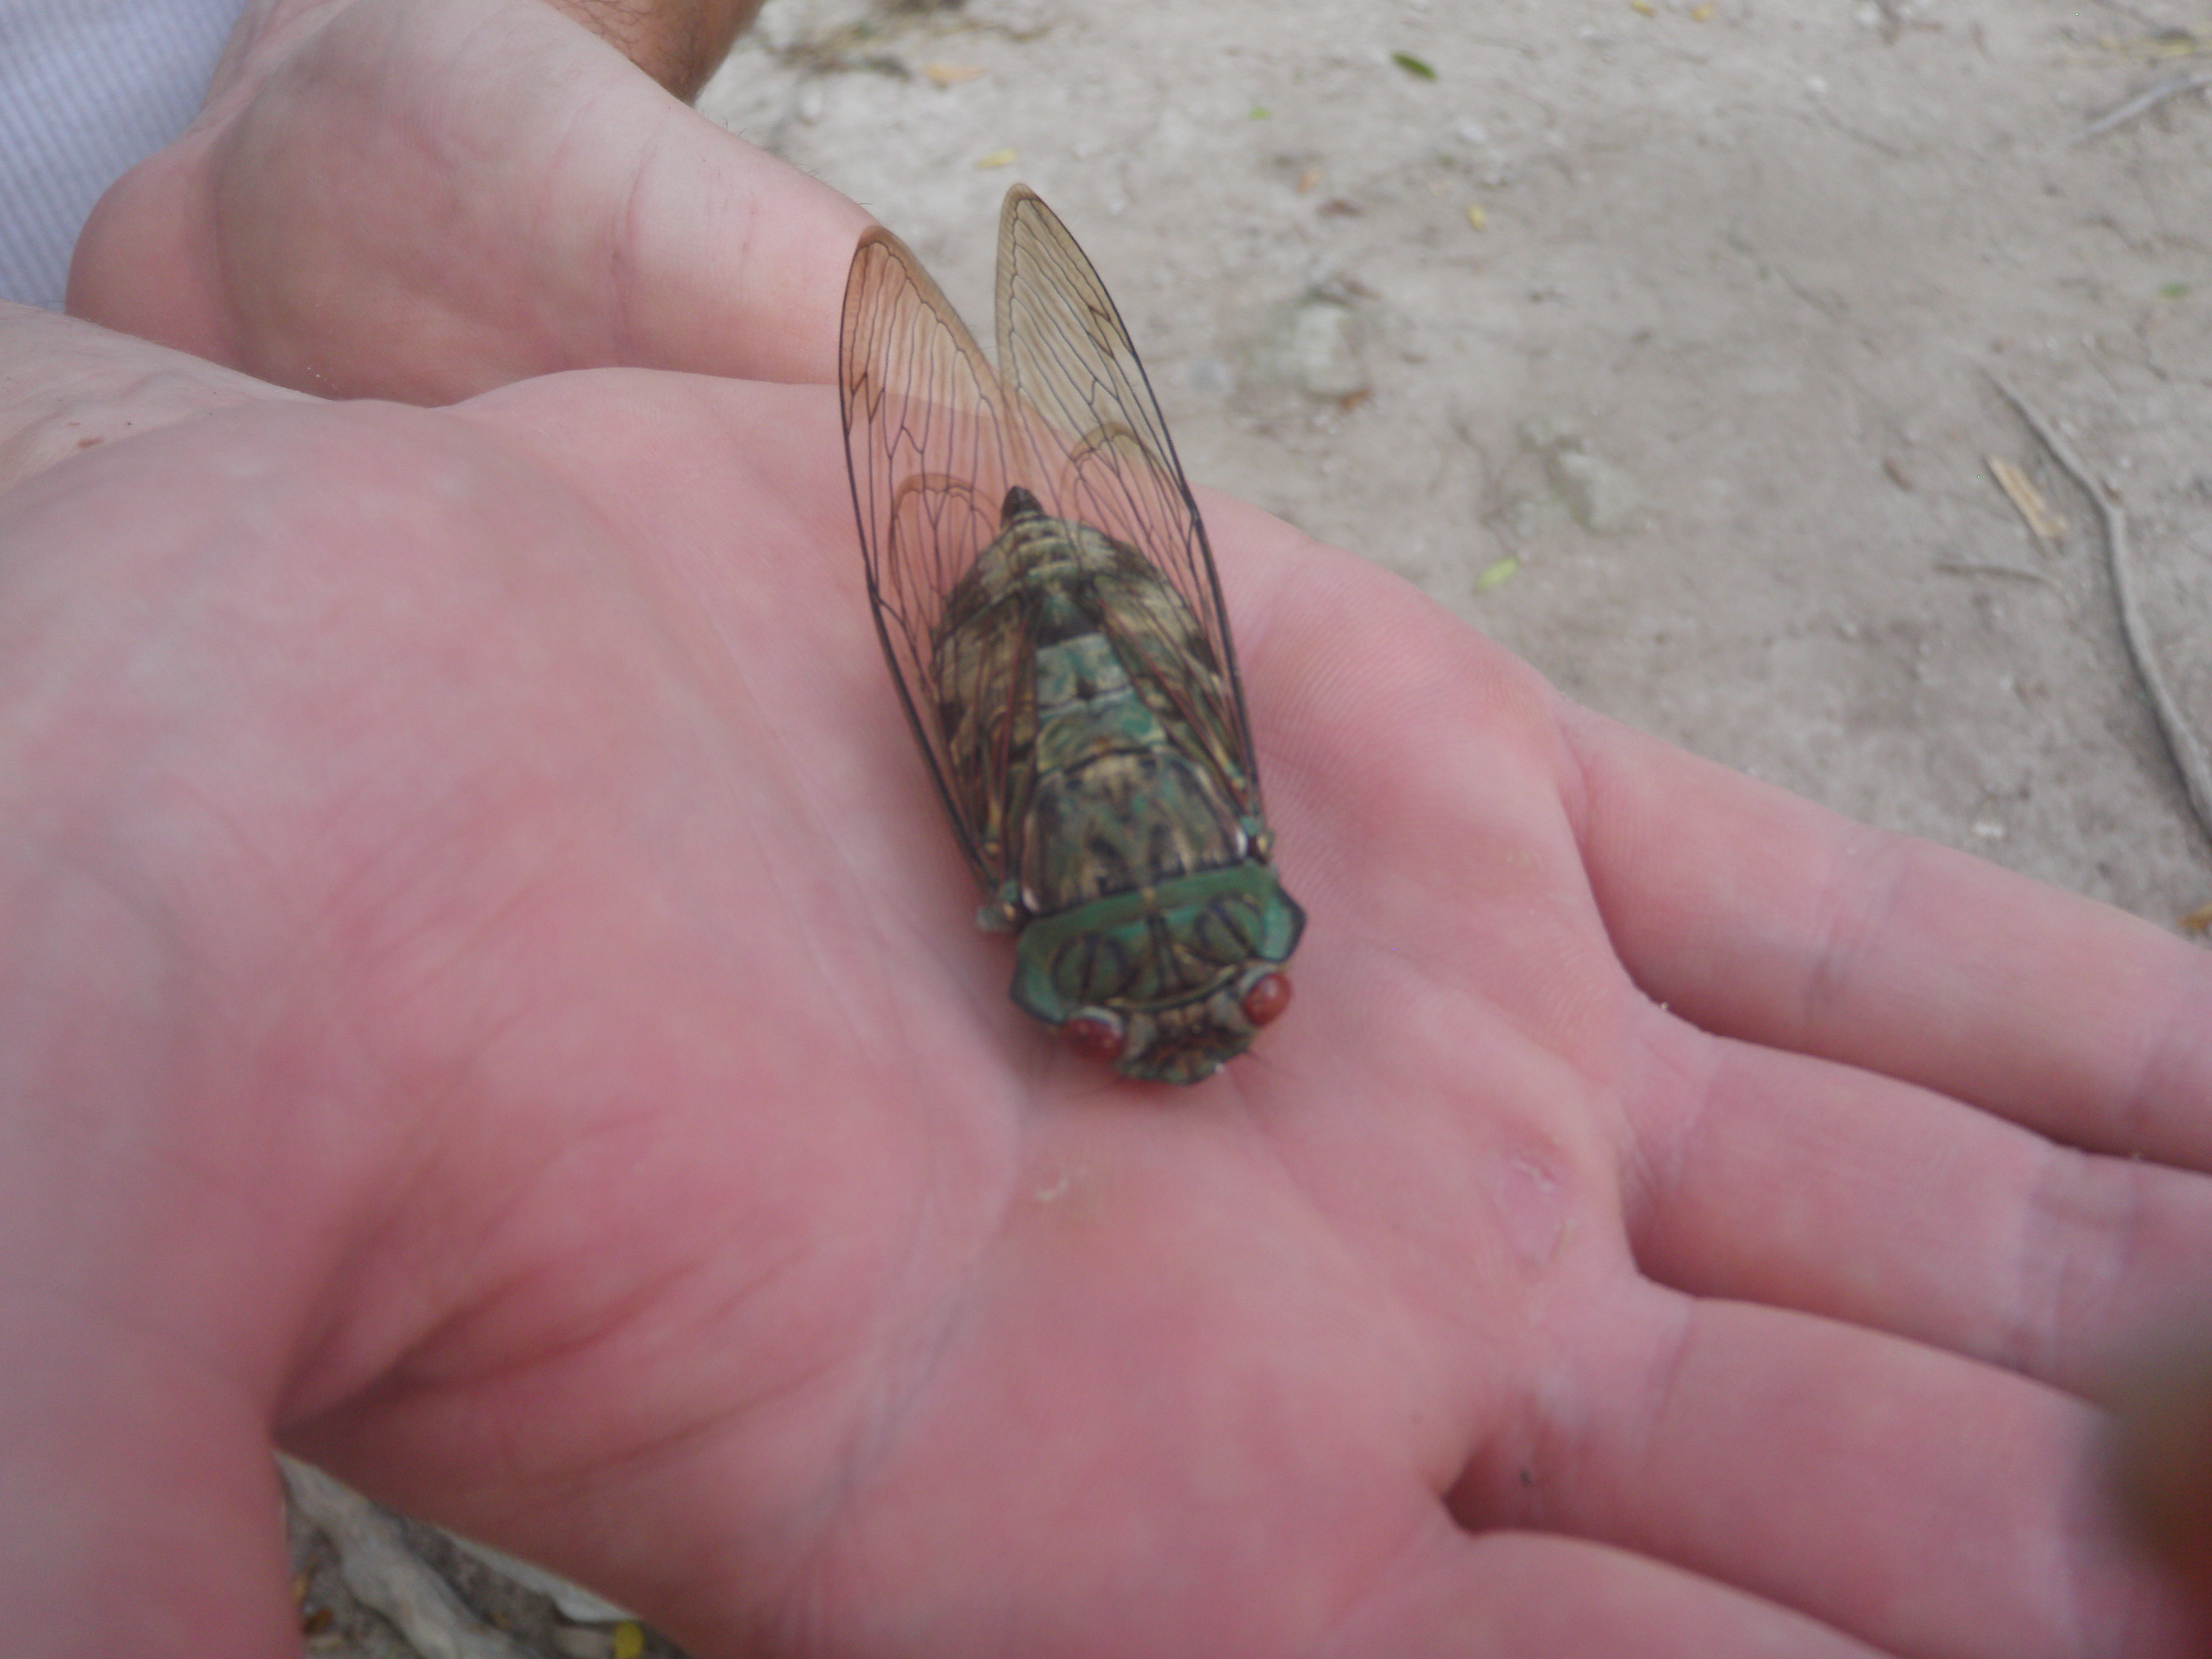 giant winged insect in palm of hand